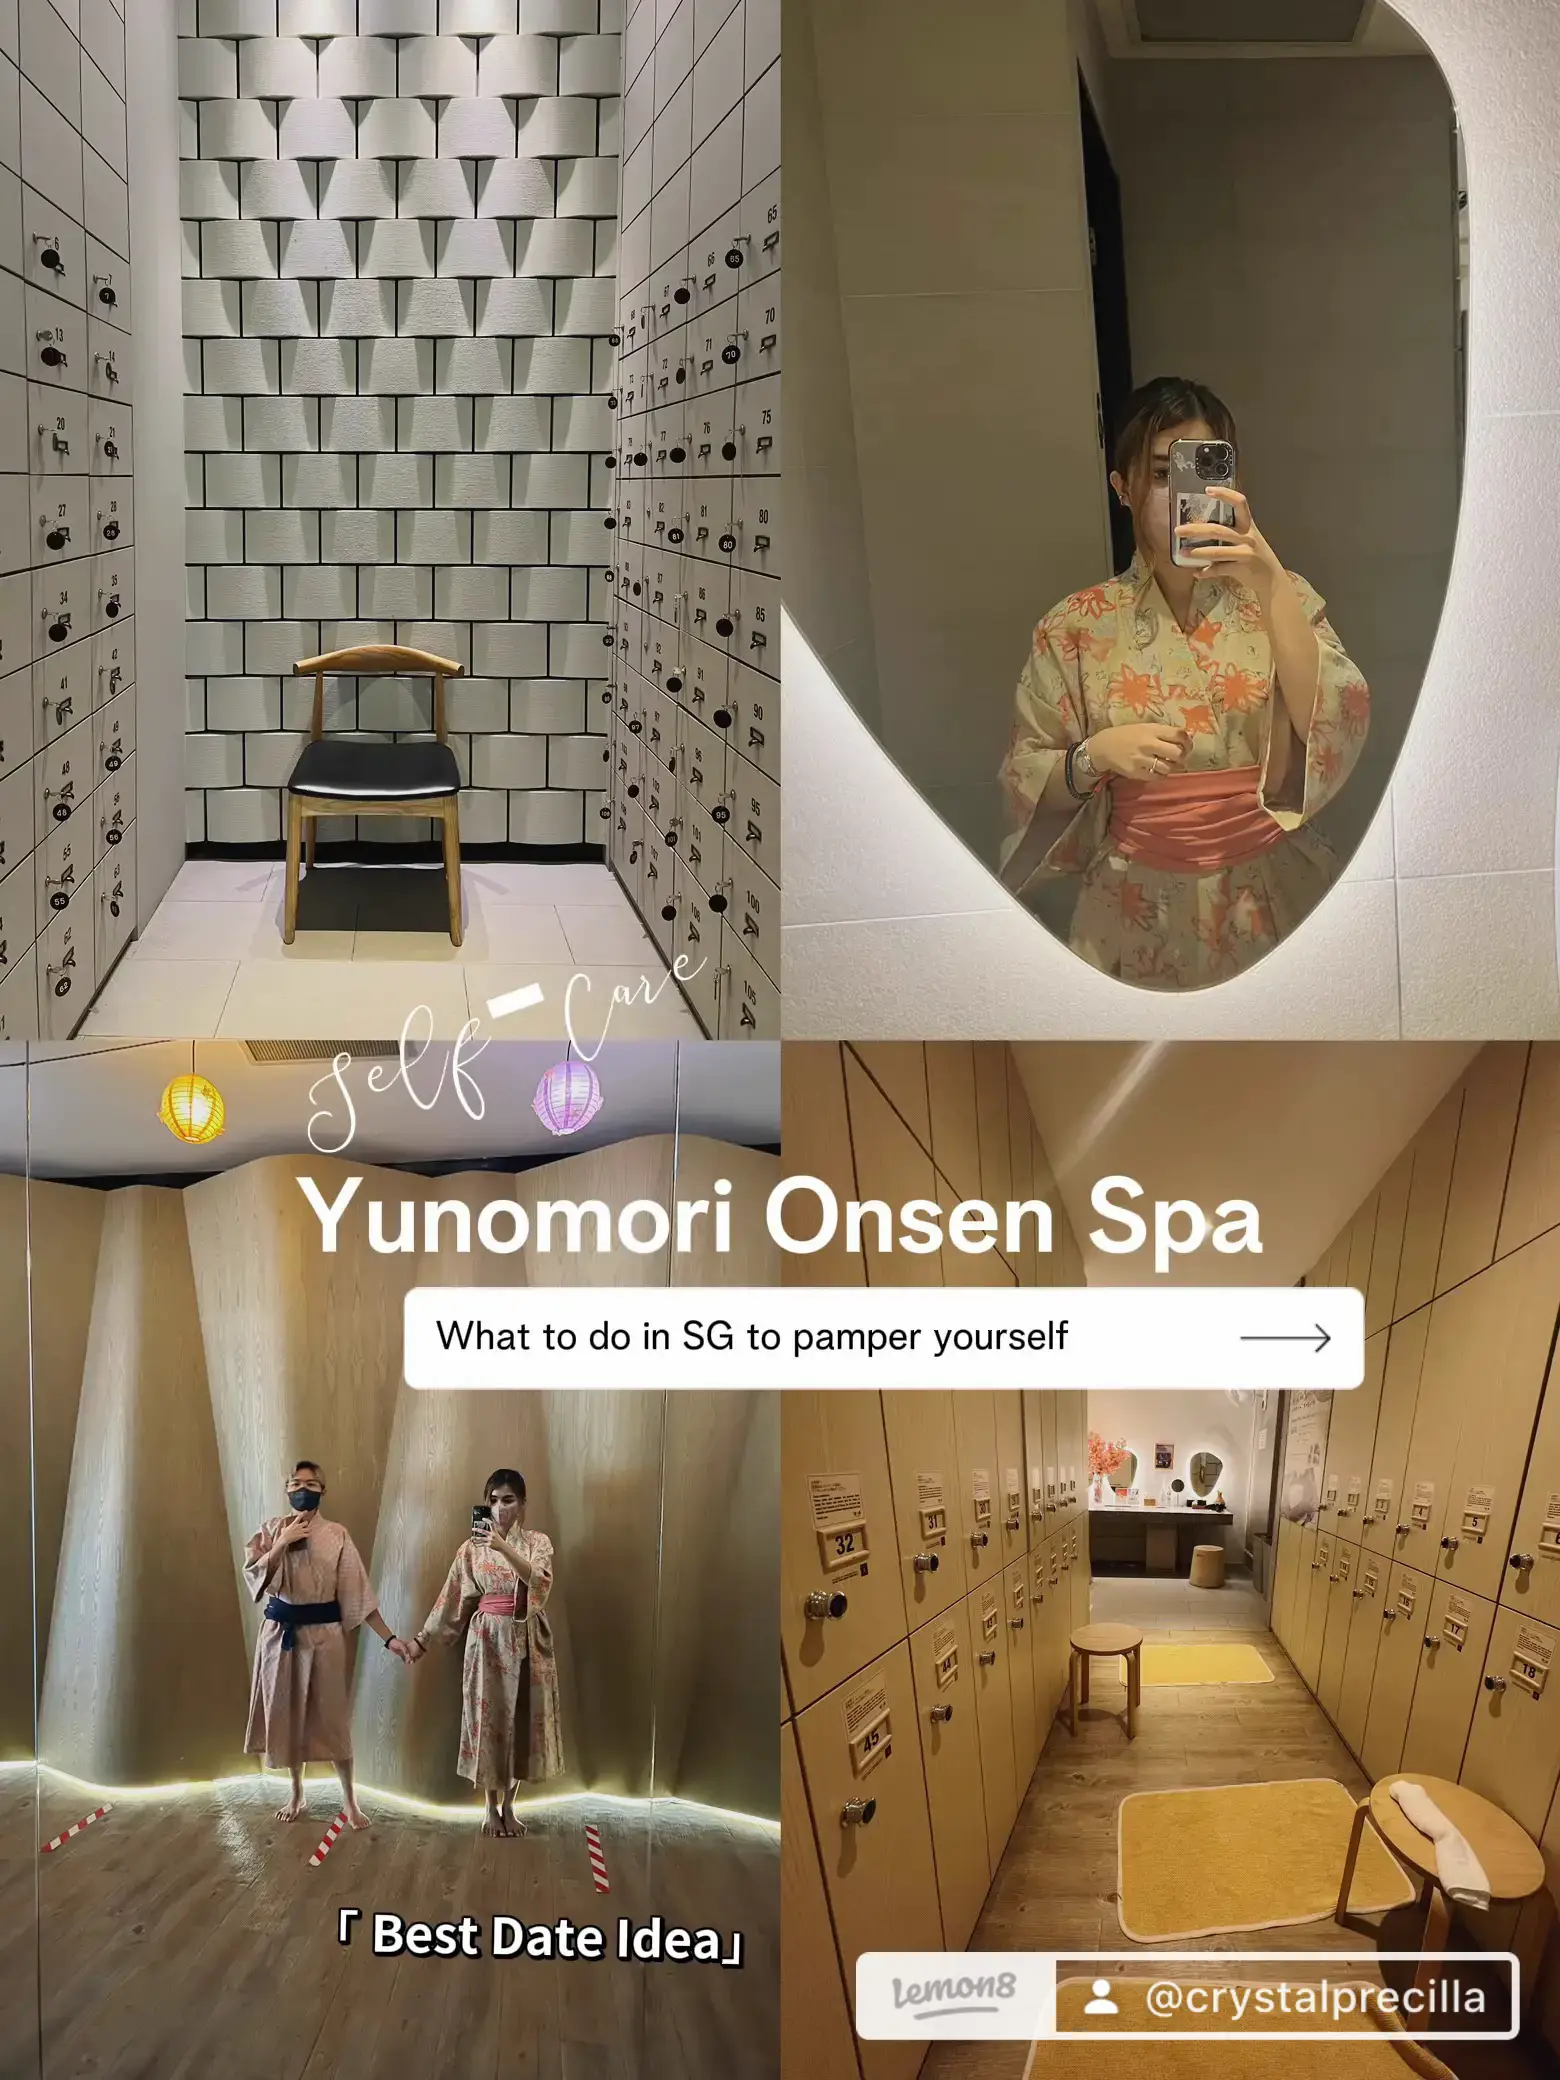 A must try Onsen in SG! 🇯🇵🇸🇬♨️'s images(0)